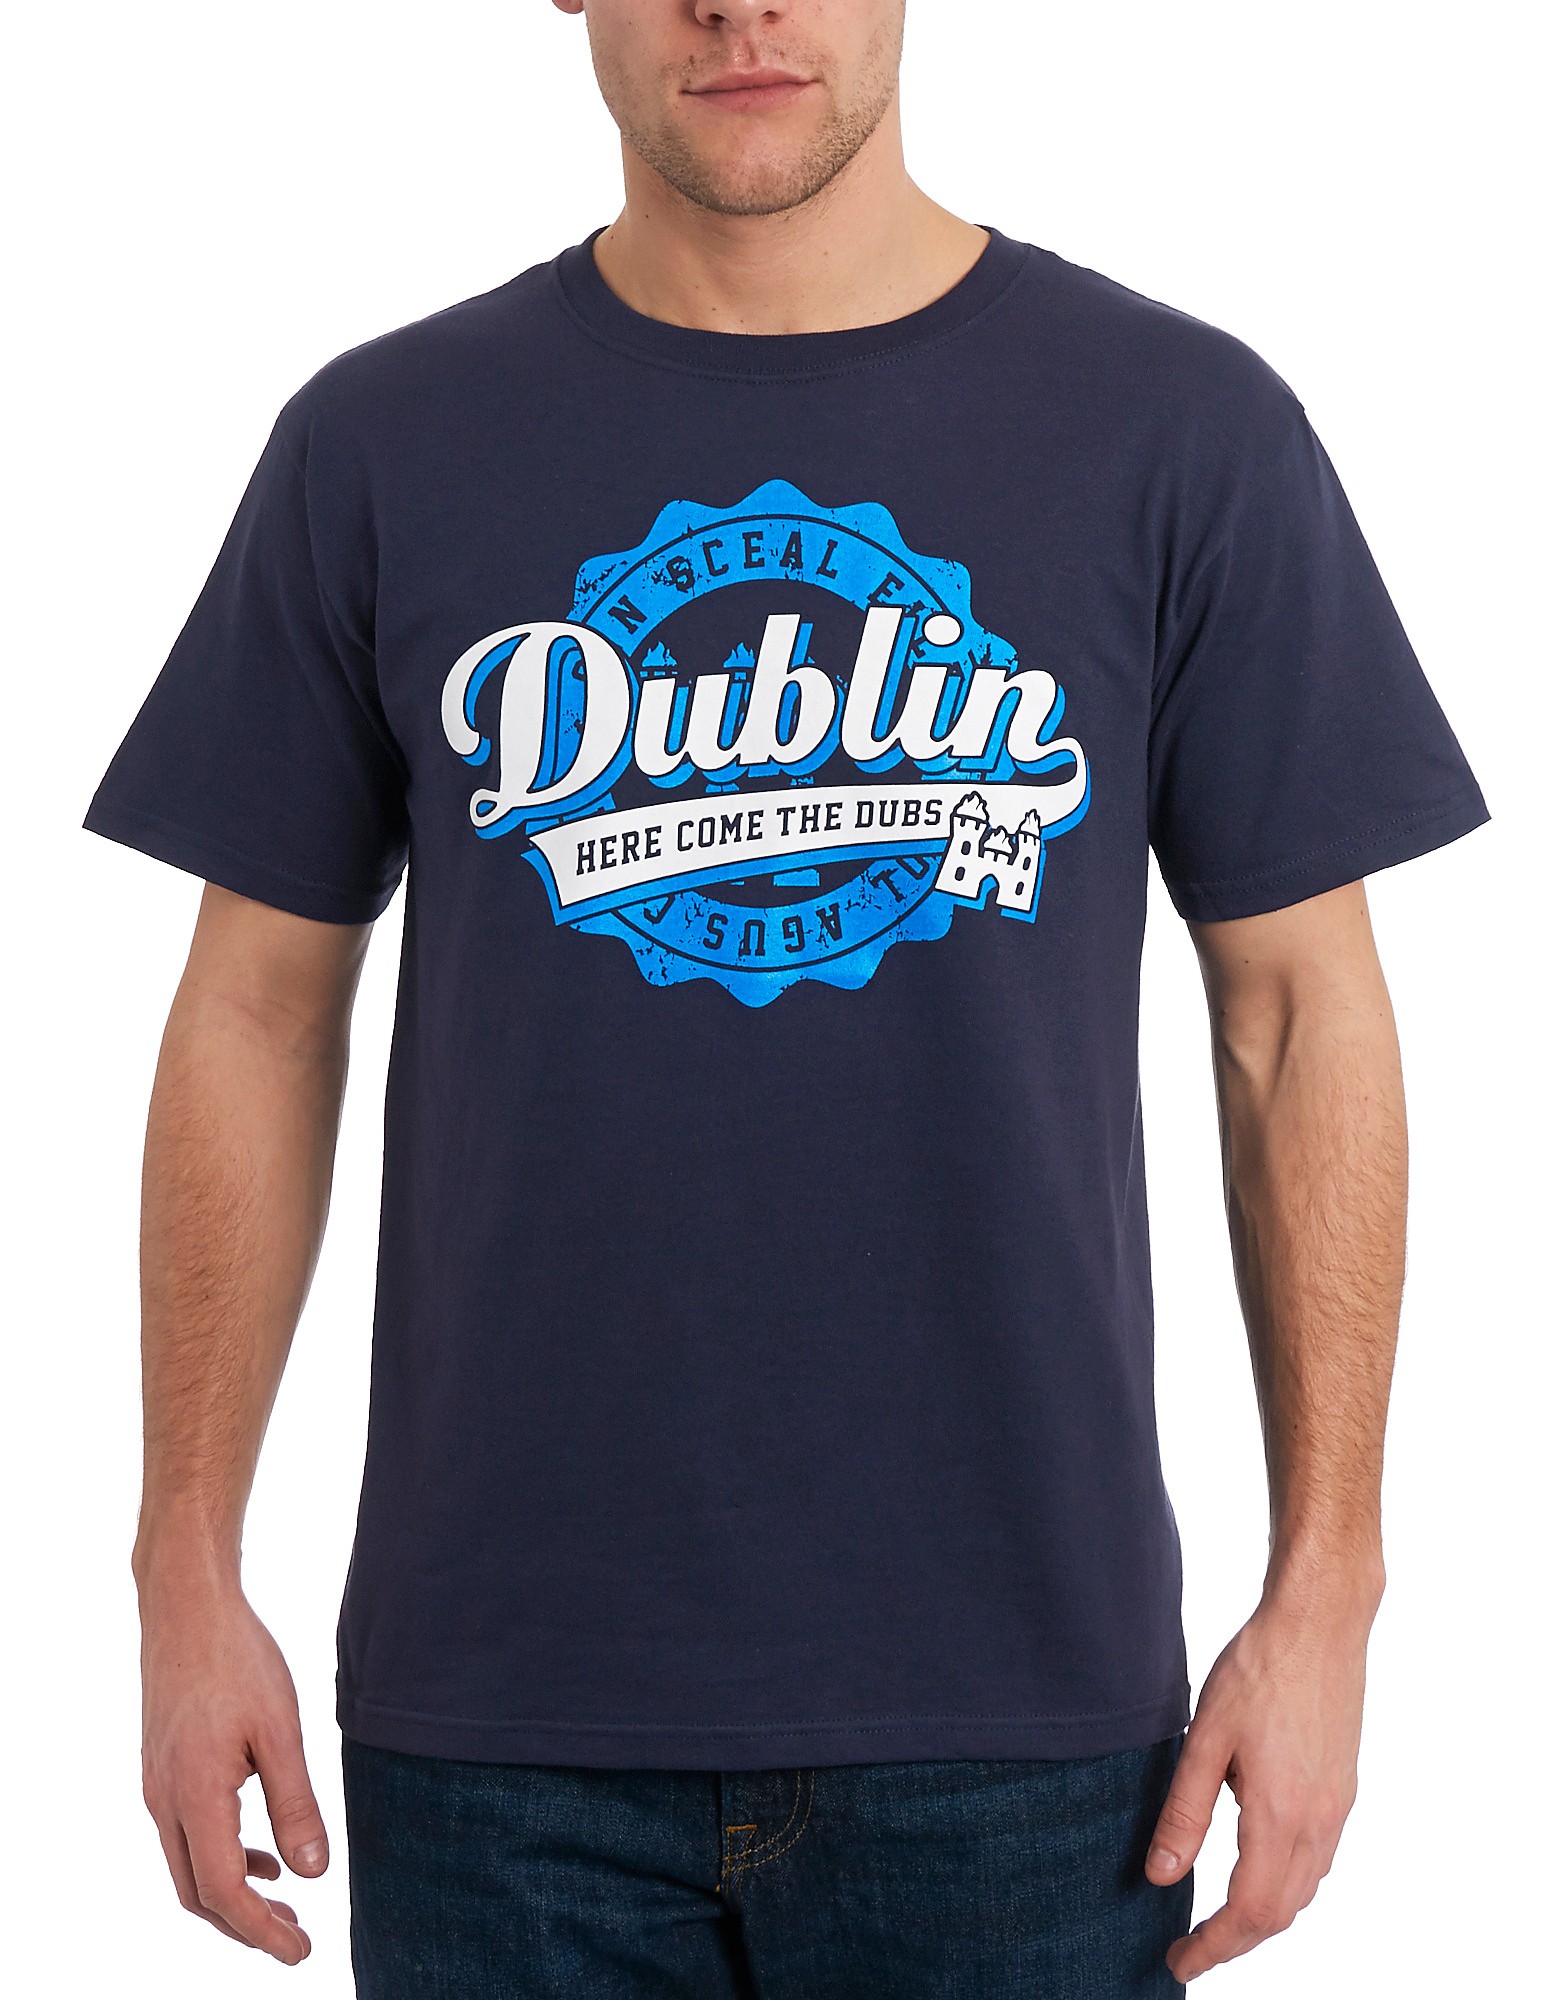 Champion Here Come the Dubs T-Shirt